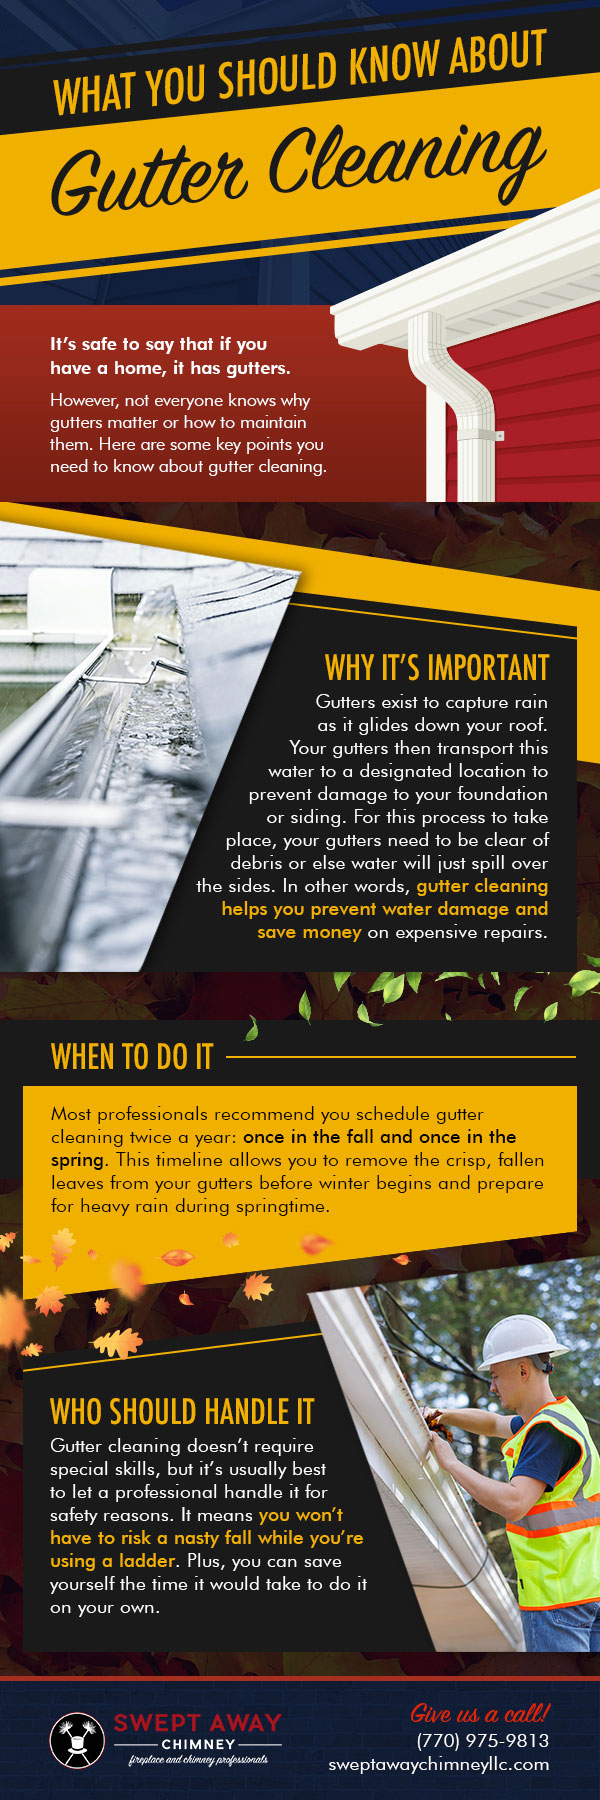 Important Things You Need to Know About Gutter Cleaning